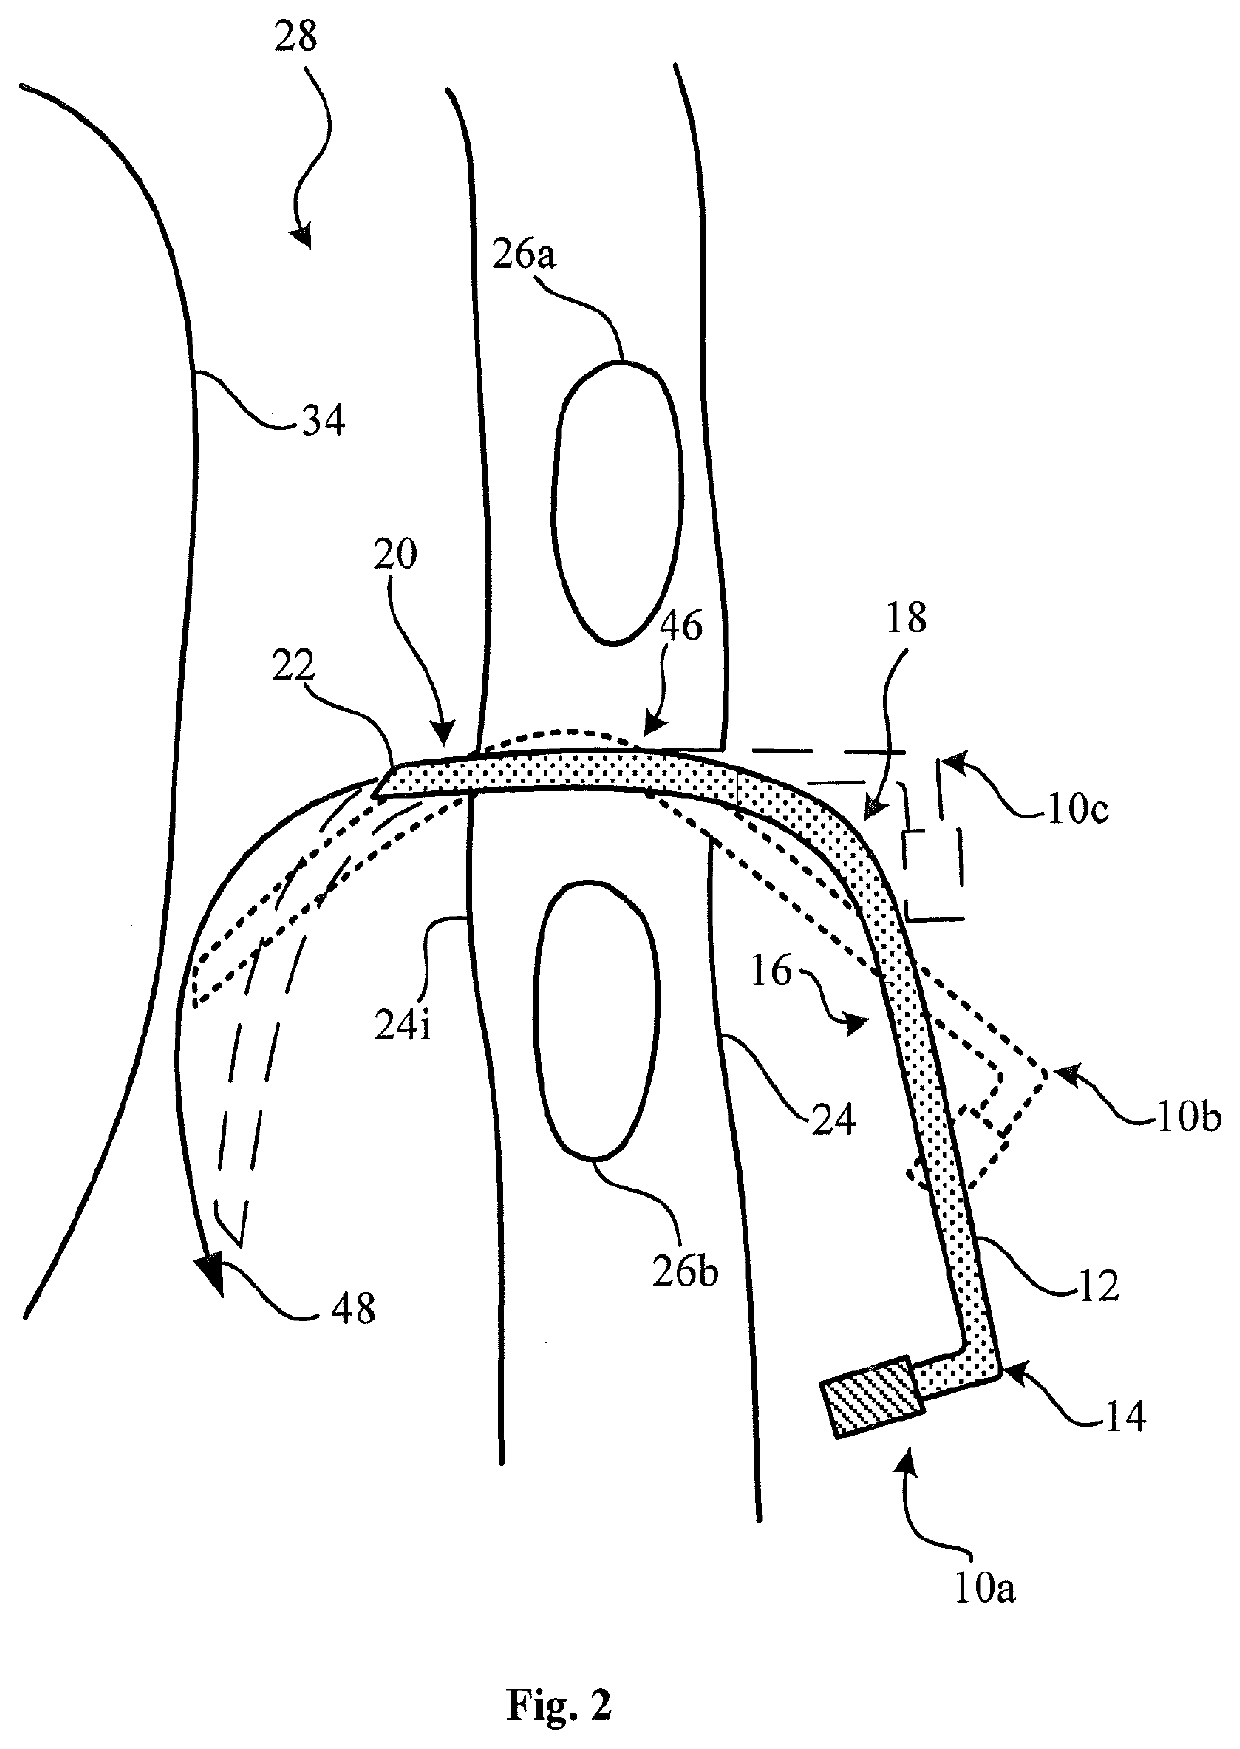 Needle assembly for relieving a pneumothorax